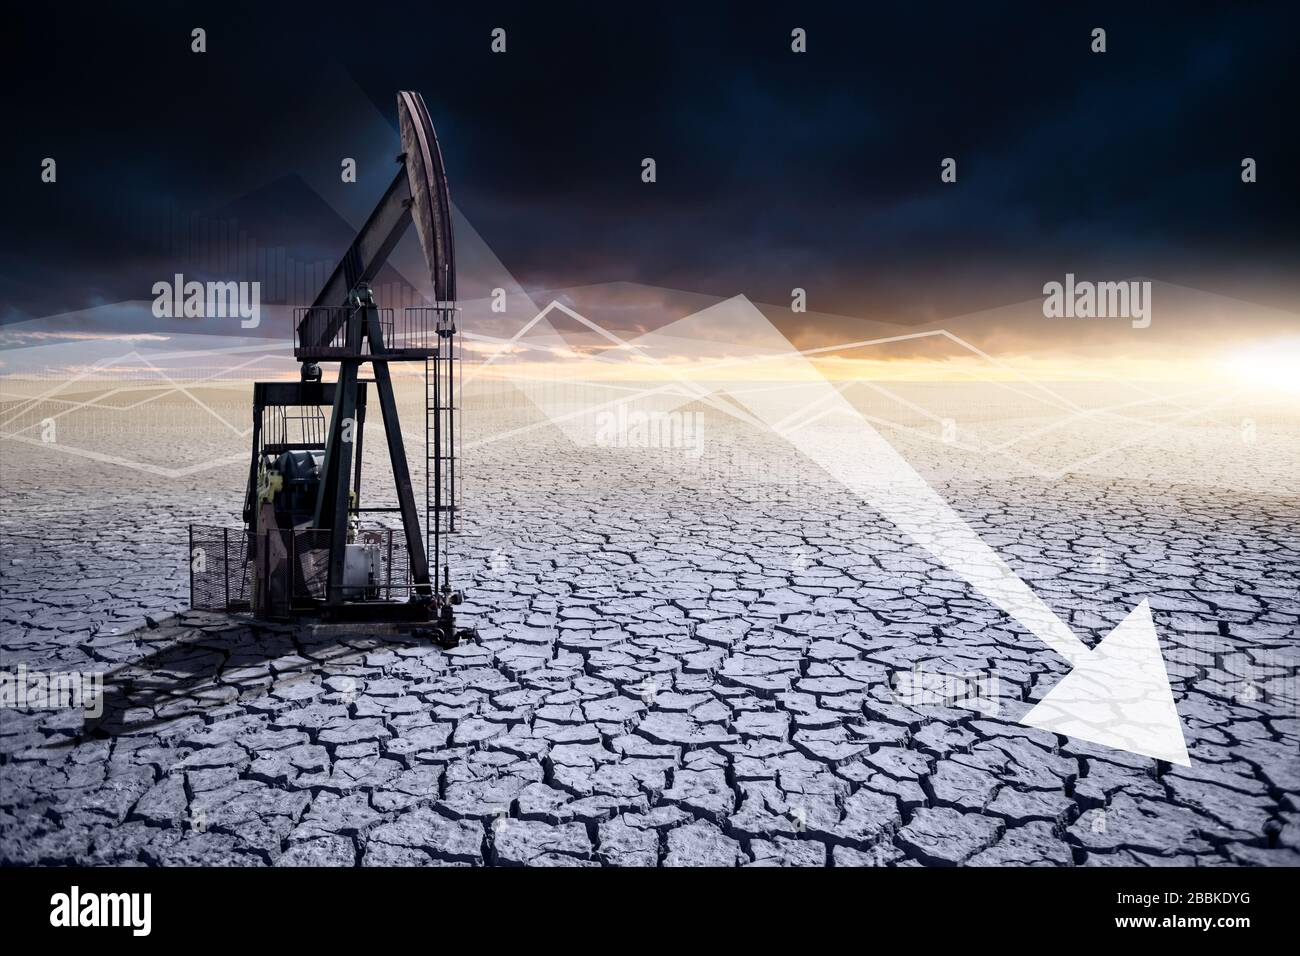 Oil rig in the desert on a background of a dramatic sky. Rusty sign with down arrow. Symbol of the collapse in the oil industry Stock Photo